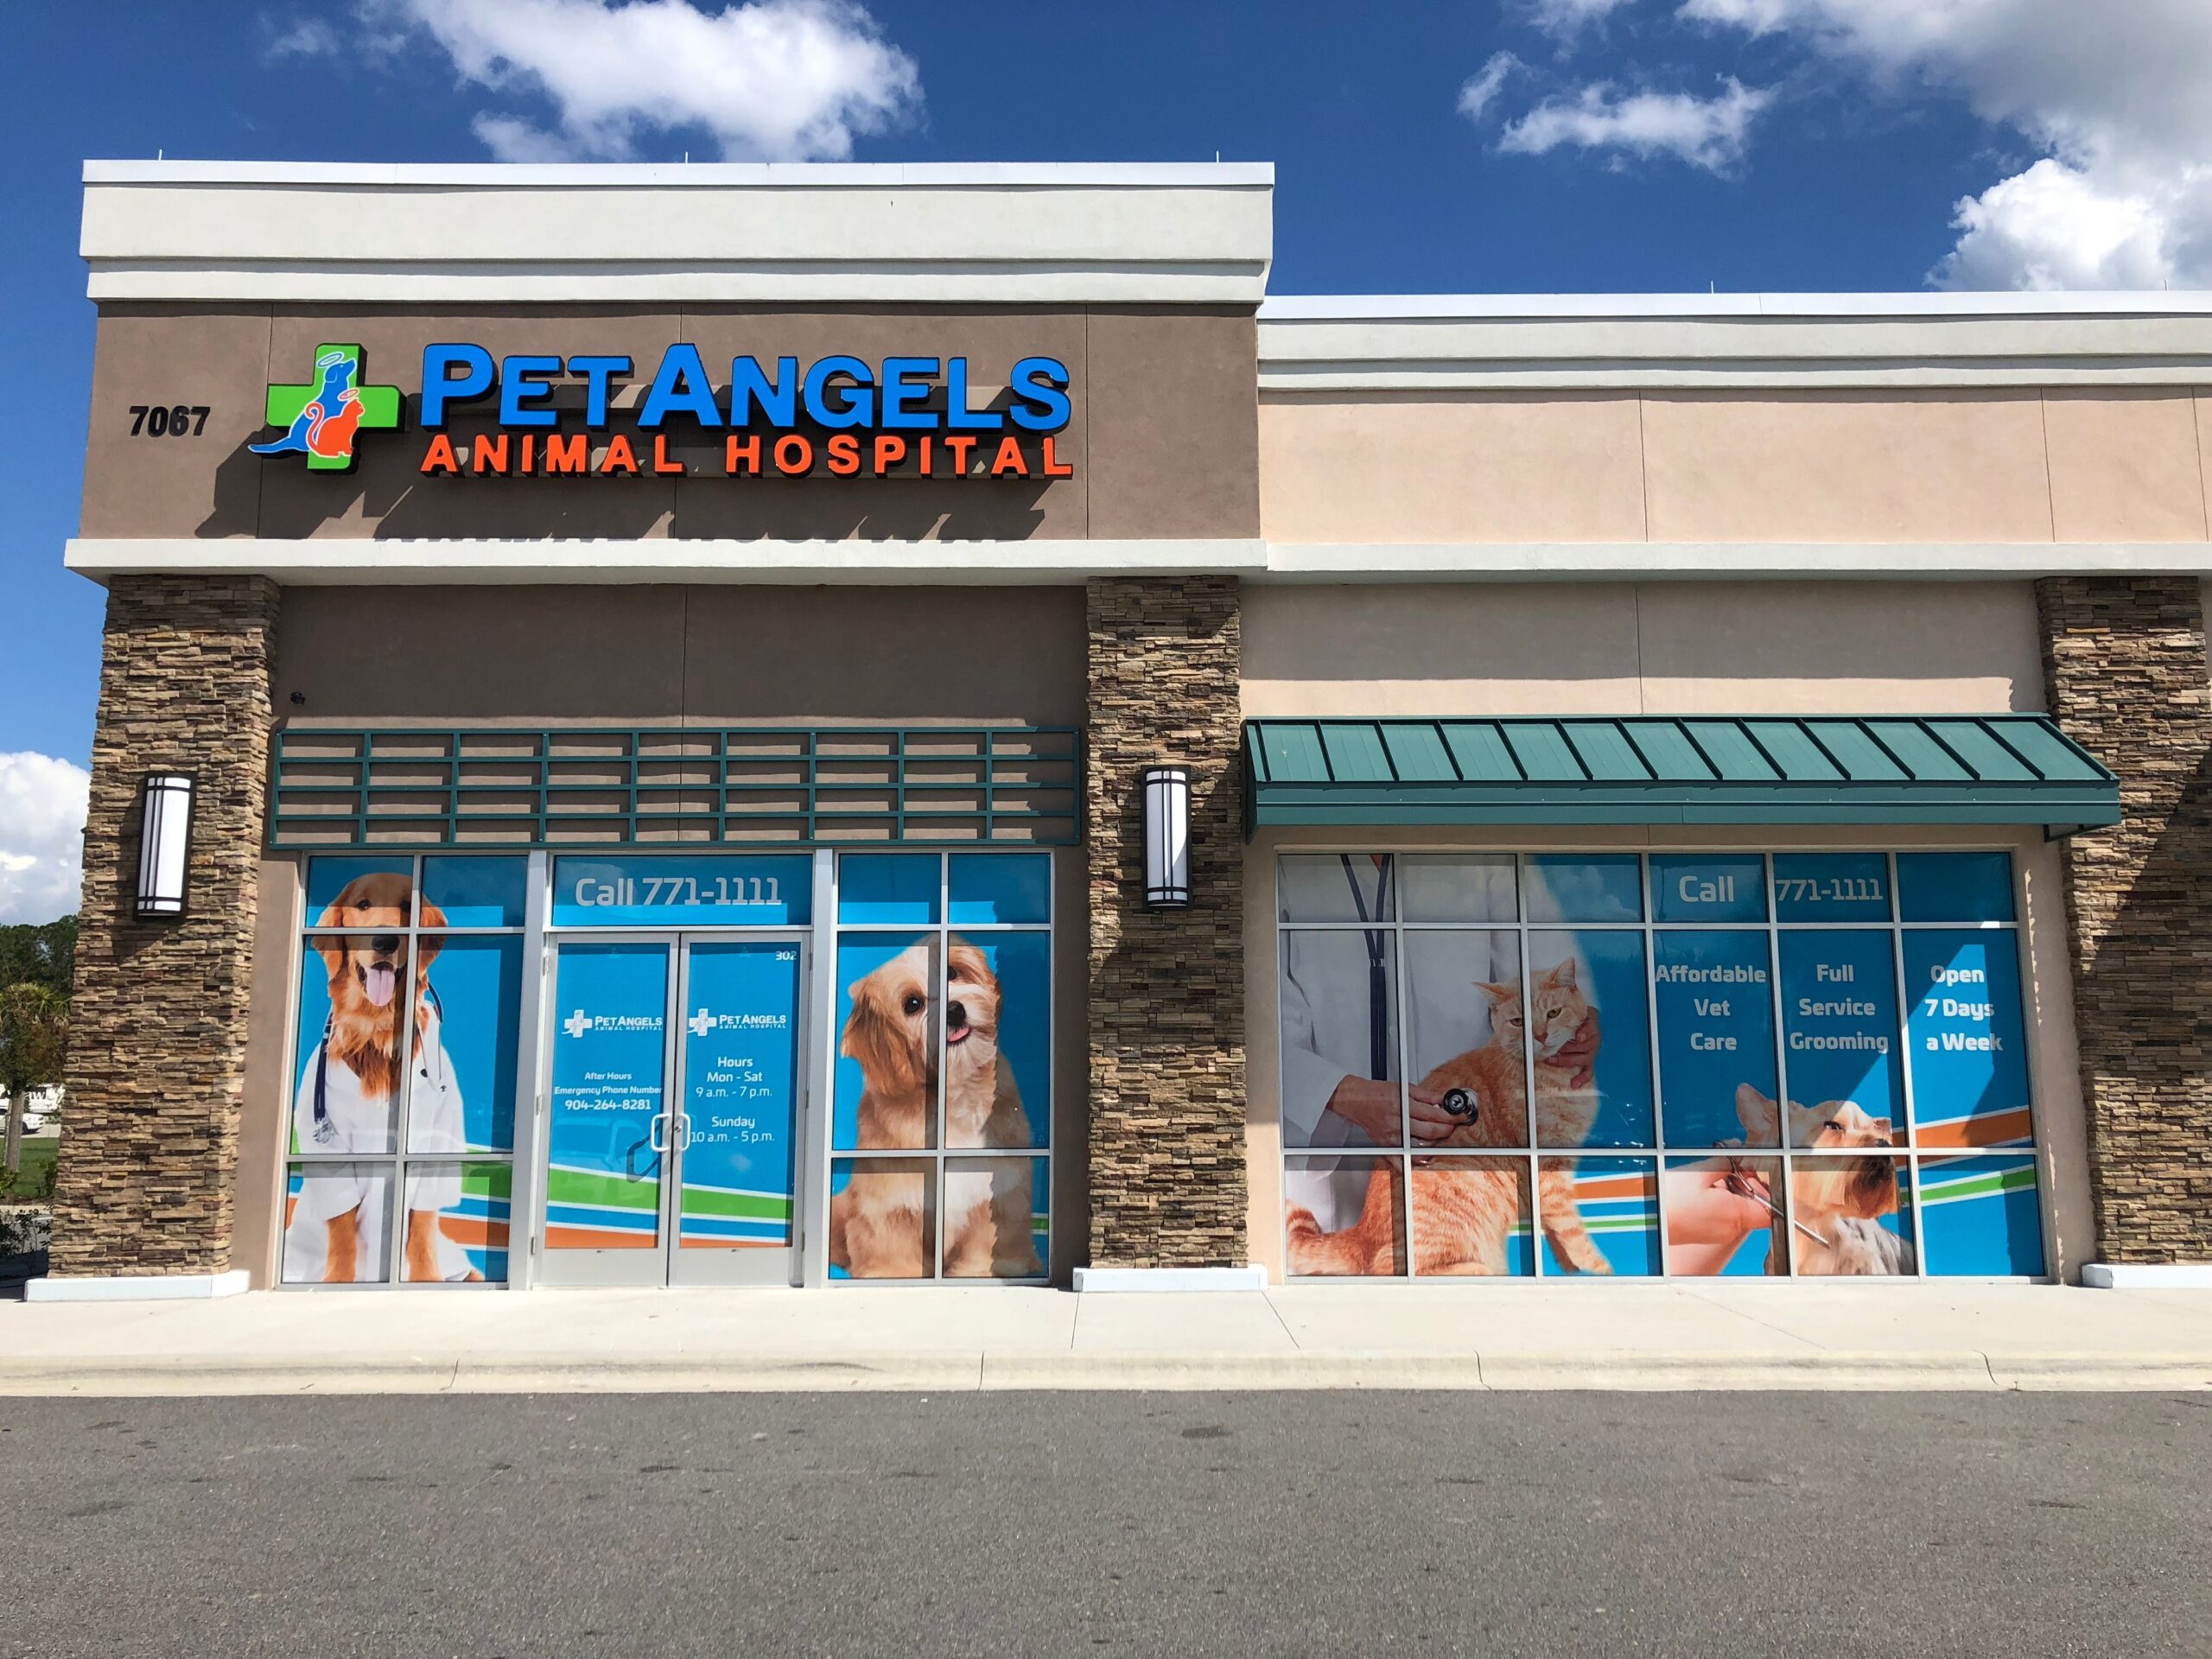 Yield Major Brand Recognition Using Storefront Wraps | Wraps Direct